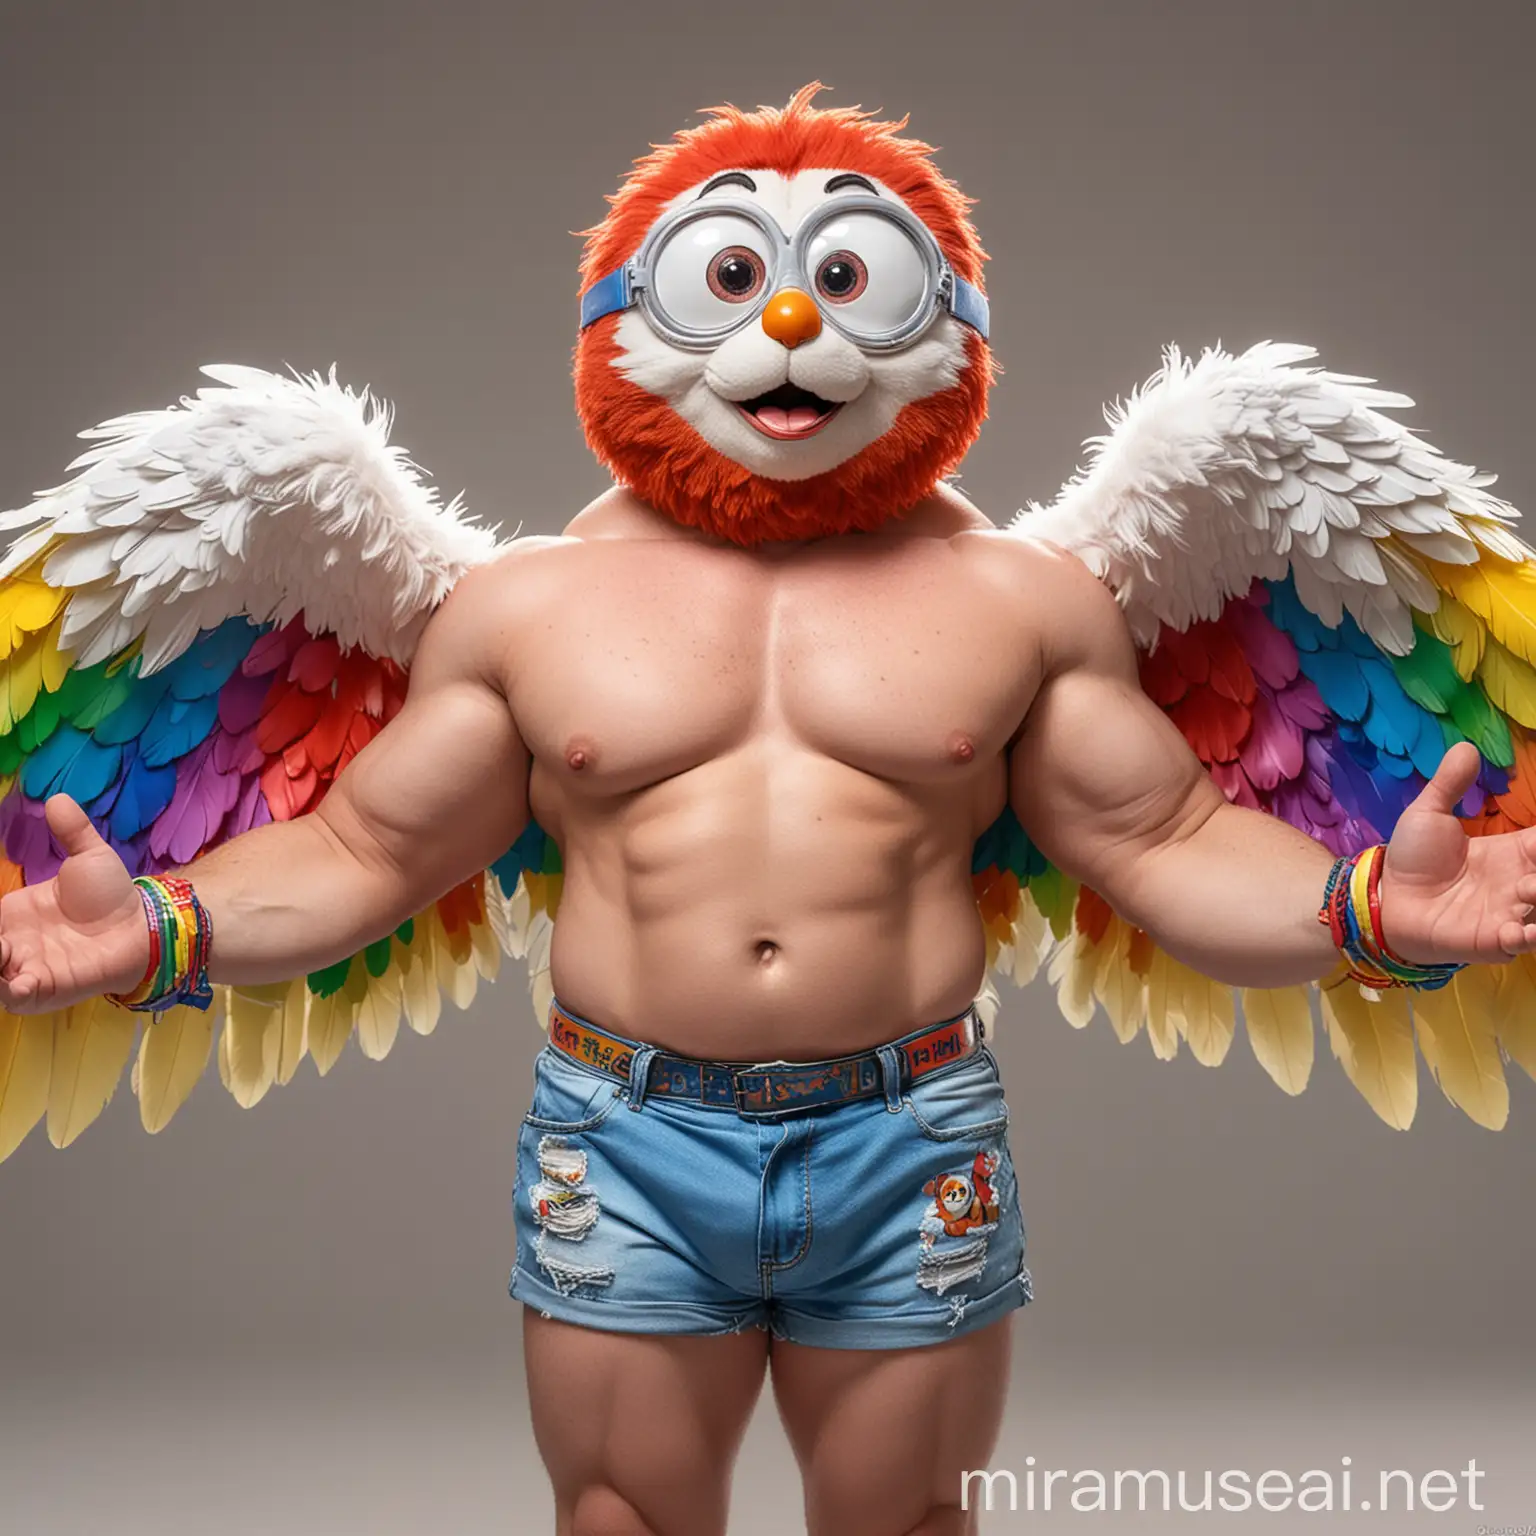 Studio Light Subtle Smile Topless 40s Ultra Chunky Red Head Bodybuilder Daddy Big Eyes with Beard Wearing Multi-Highlighter Bright Rainbow Colored See Through huge Eagle Wings Shoulder Jacket short shorts and Flexing his Big Strong Arm Up with Doraemon Goggles on forehead